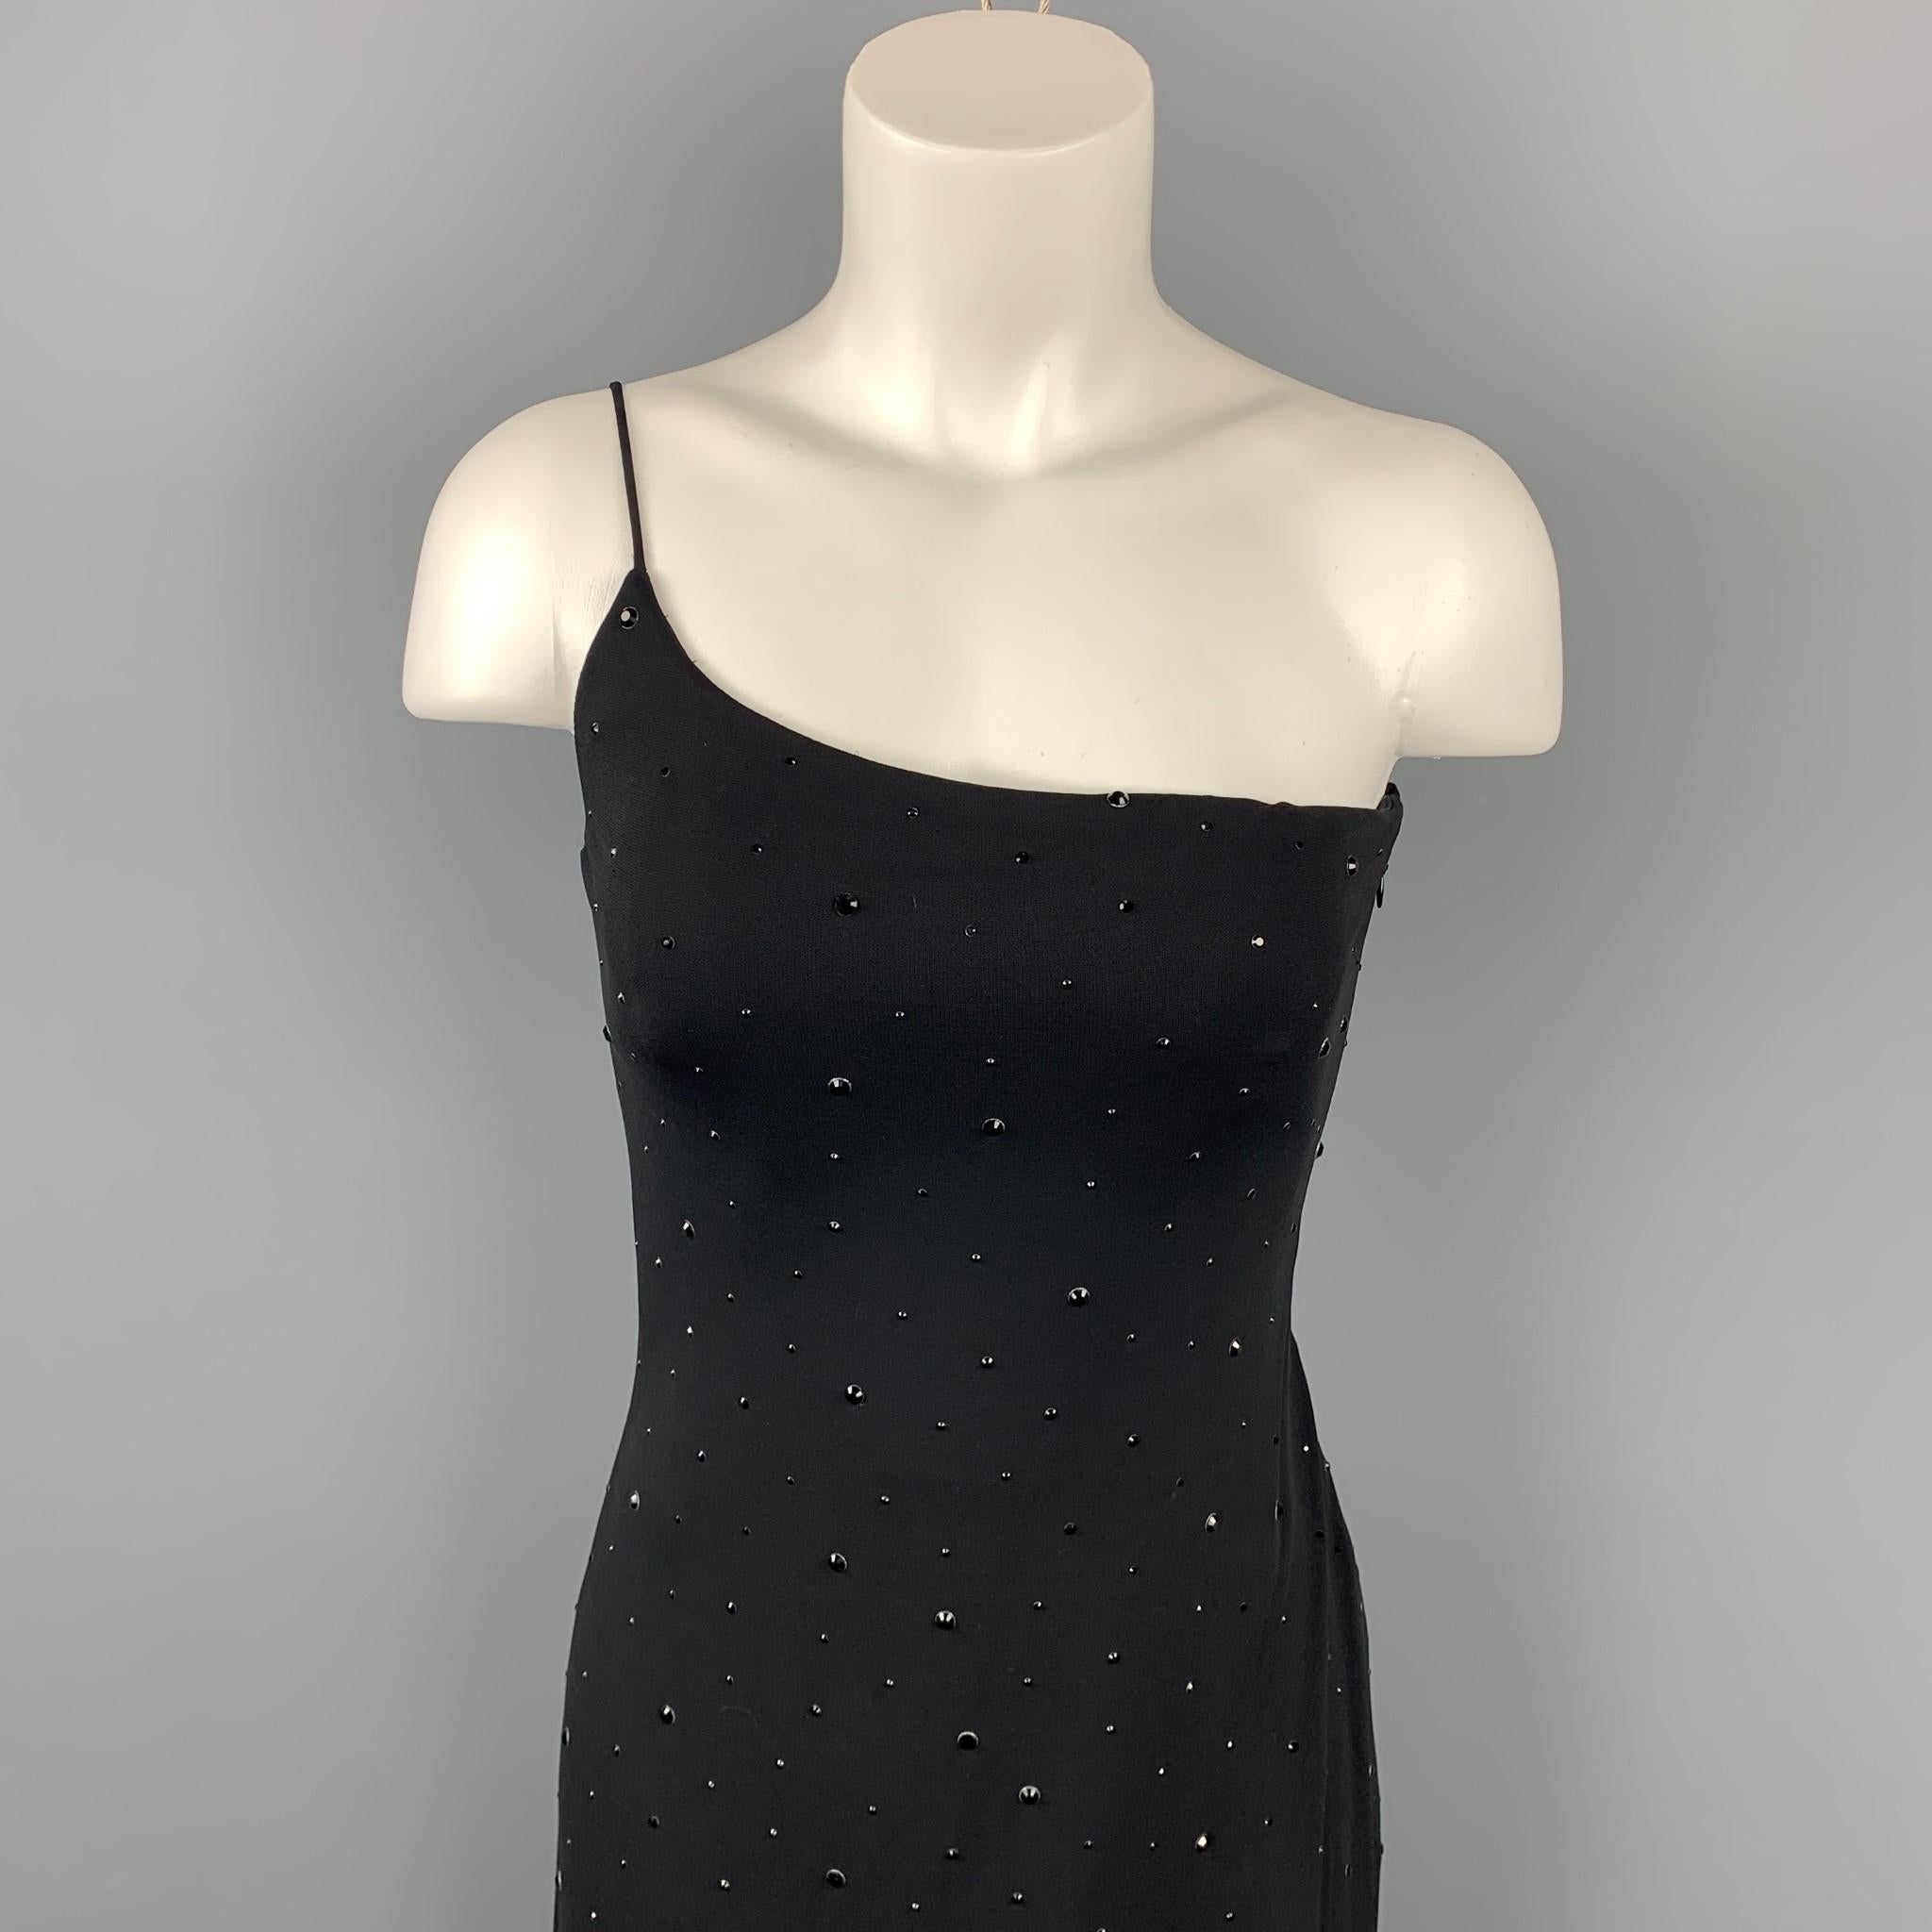 GIORGIO ARMANI dress comes in a black beaded material featuring a shift style, spaghetti straps, side slit, and a side zipper closure. Made in Italy.

Very Good Pre-Owned Condition.
Marked: 38

Measurements:

Bust: 26 in. 
Waist: 25 in. 
Hip: 30 in.